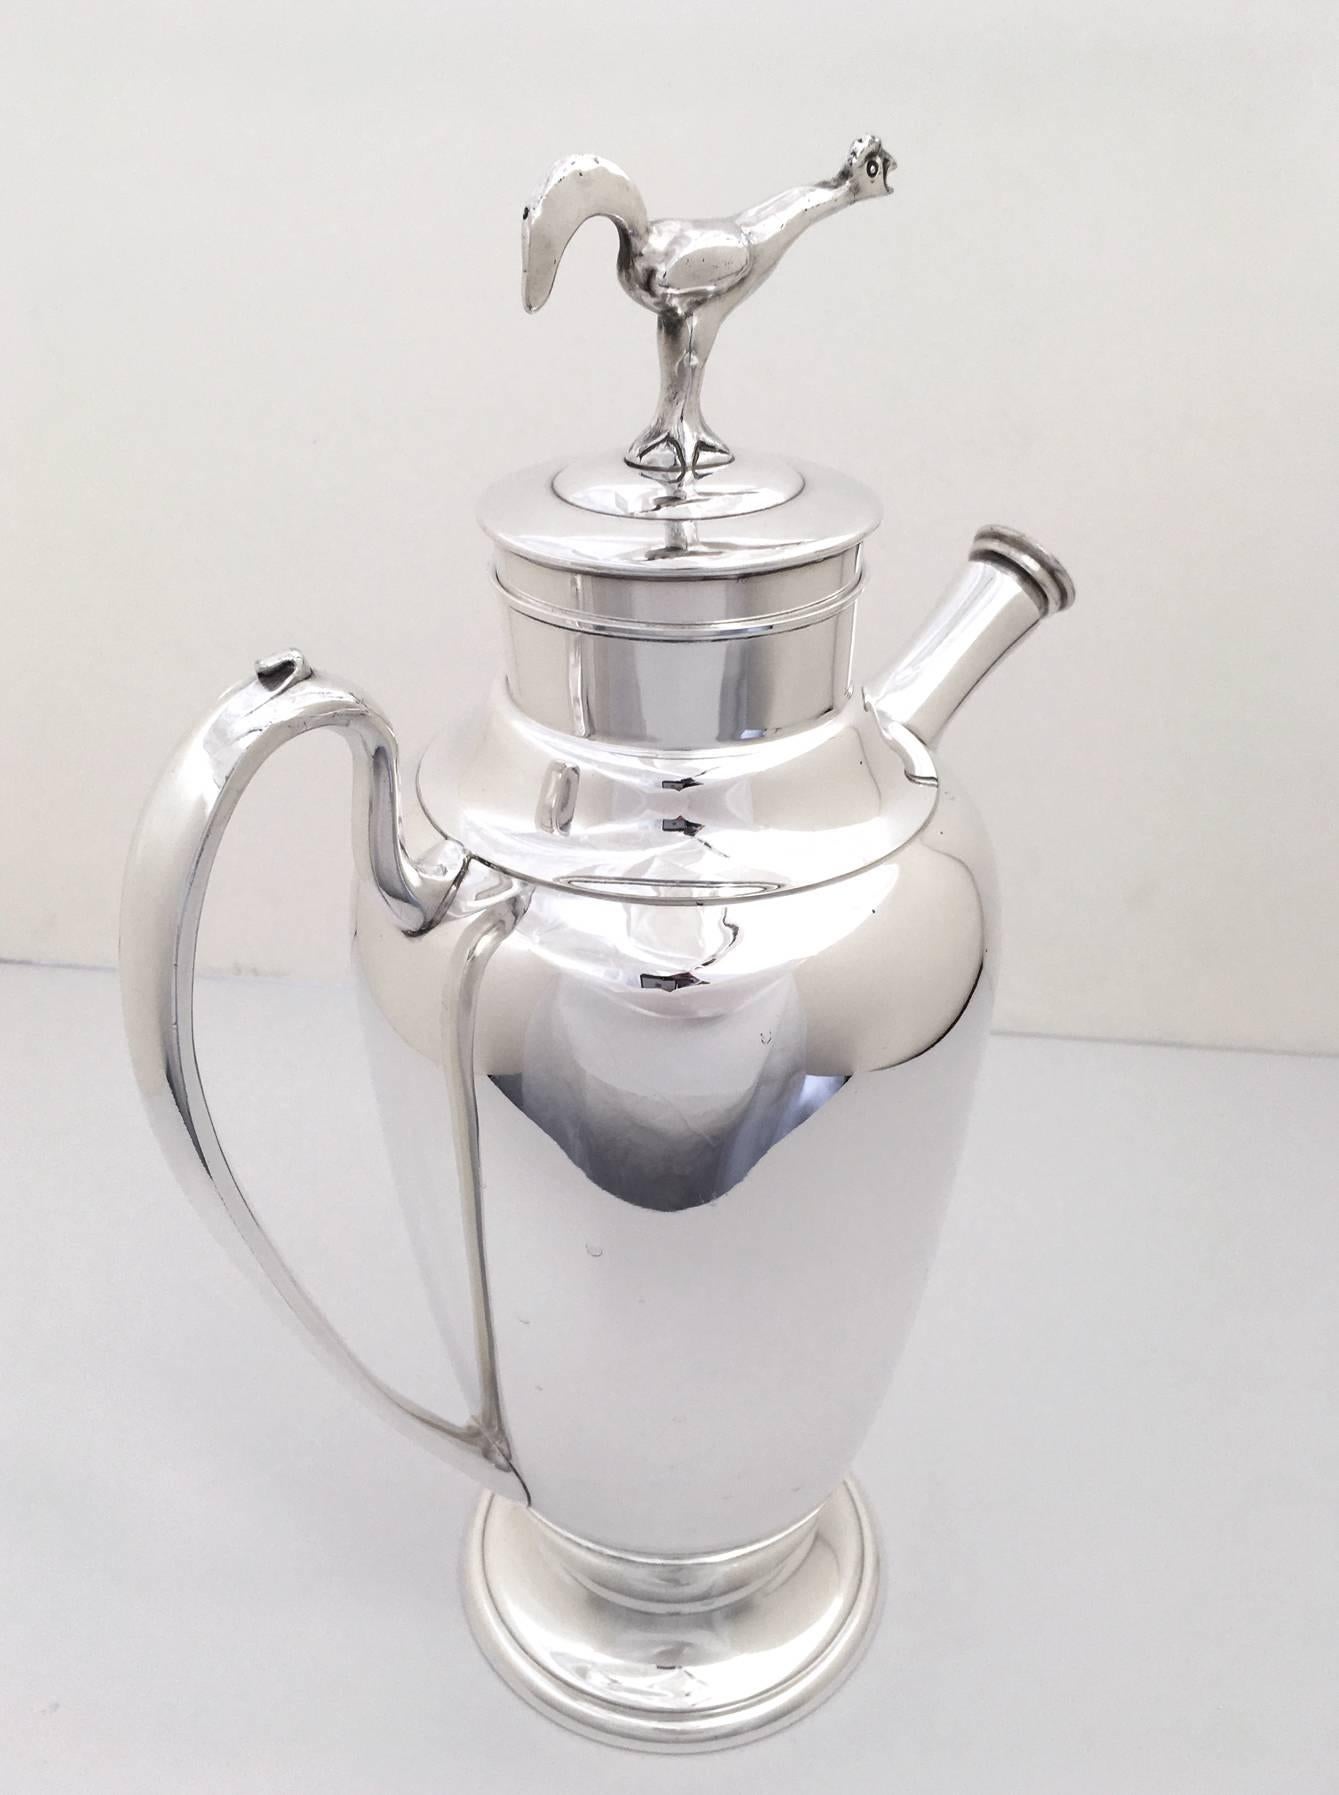 A rare and impressive silver plate cocktail Shaker with a roaring 1920s rooster on top. Apollo Studios of New York was a division of Bernard Rice's and Sons and items marked with the Apollo stamp were made from 1920 to 1922. In 1872, the Apollo